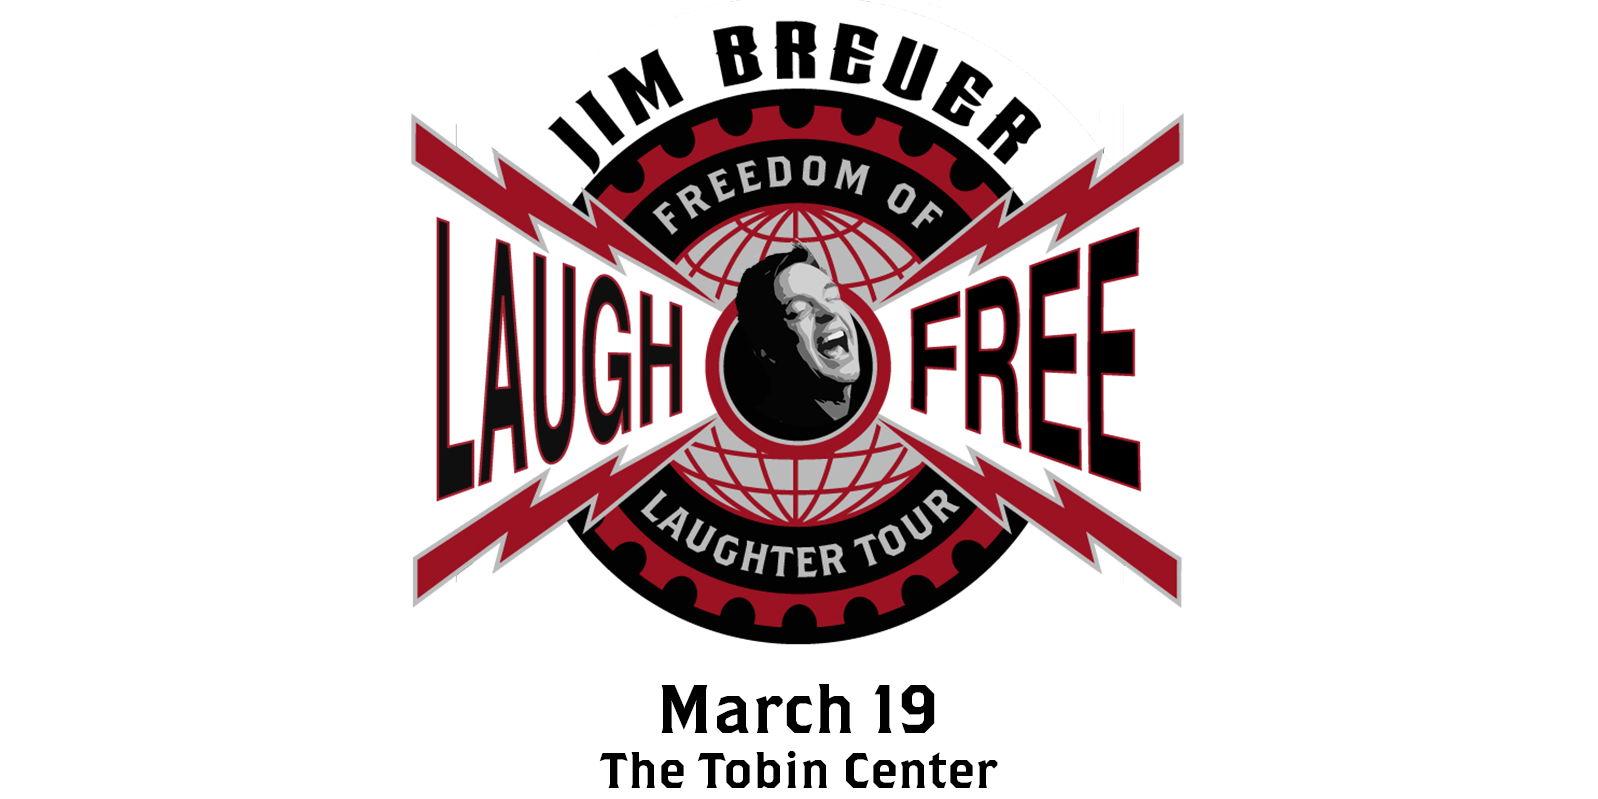 Jim Breuer: Freedom of Laughter Tour promotional image